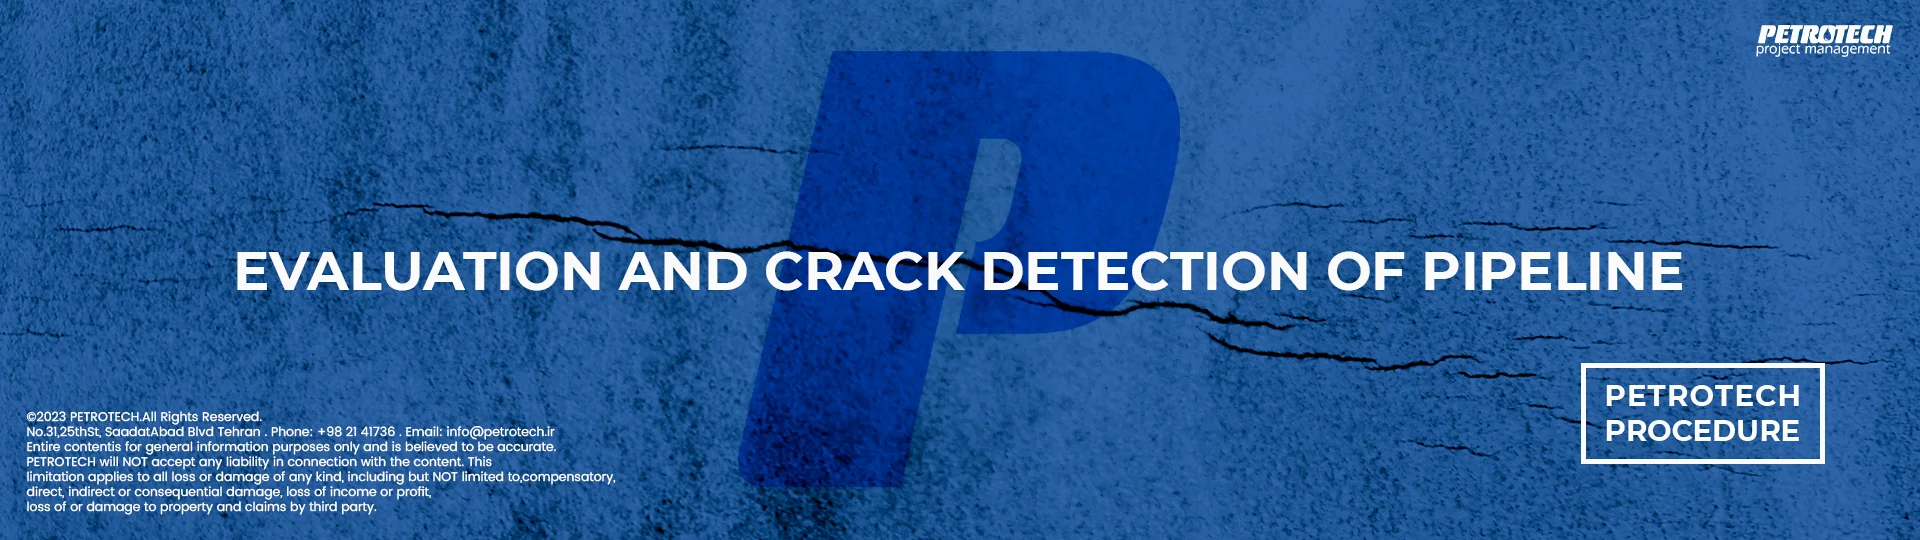 EVALUATION AND CRACK DETECTION OF PIPELINE